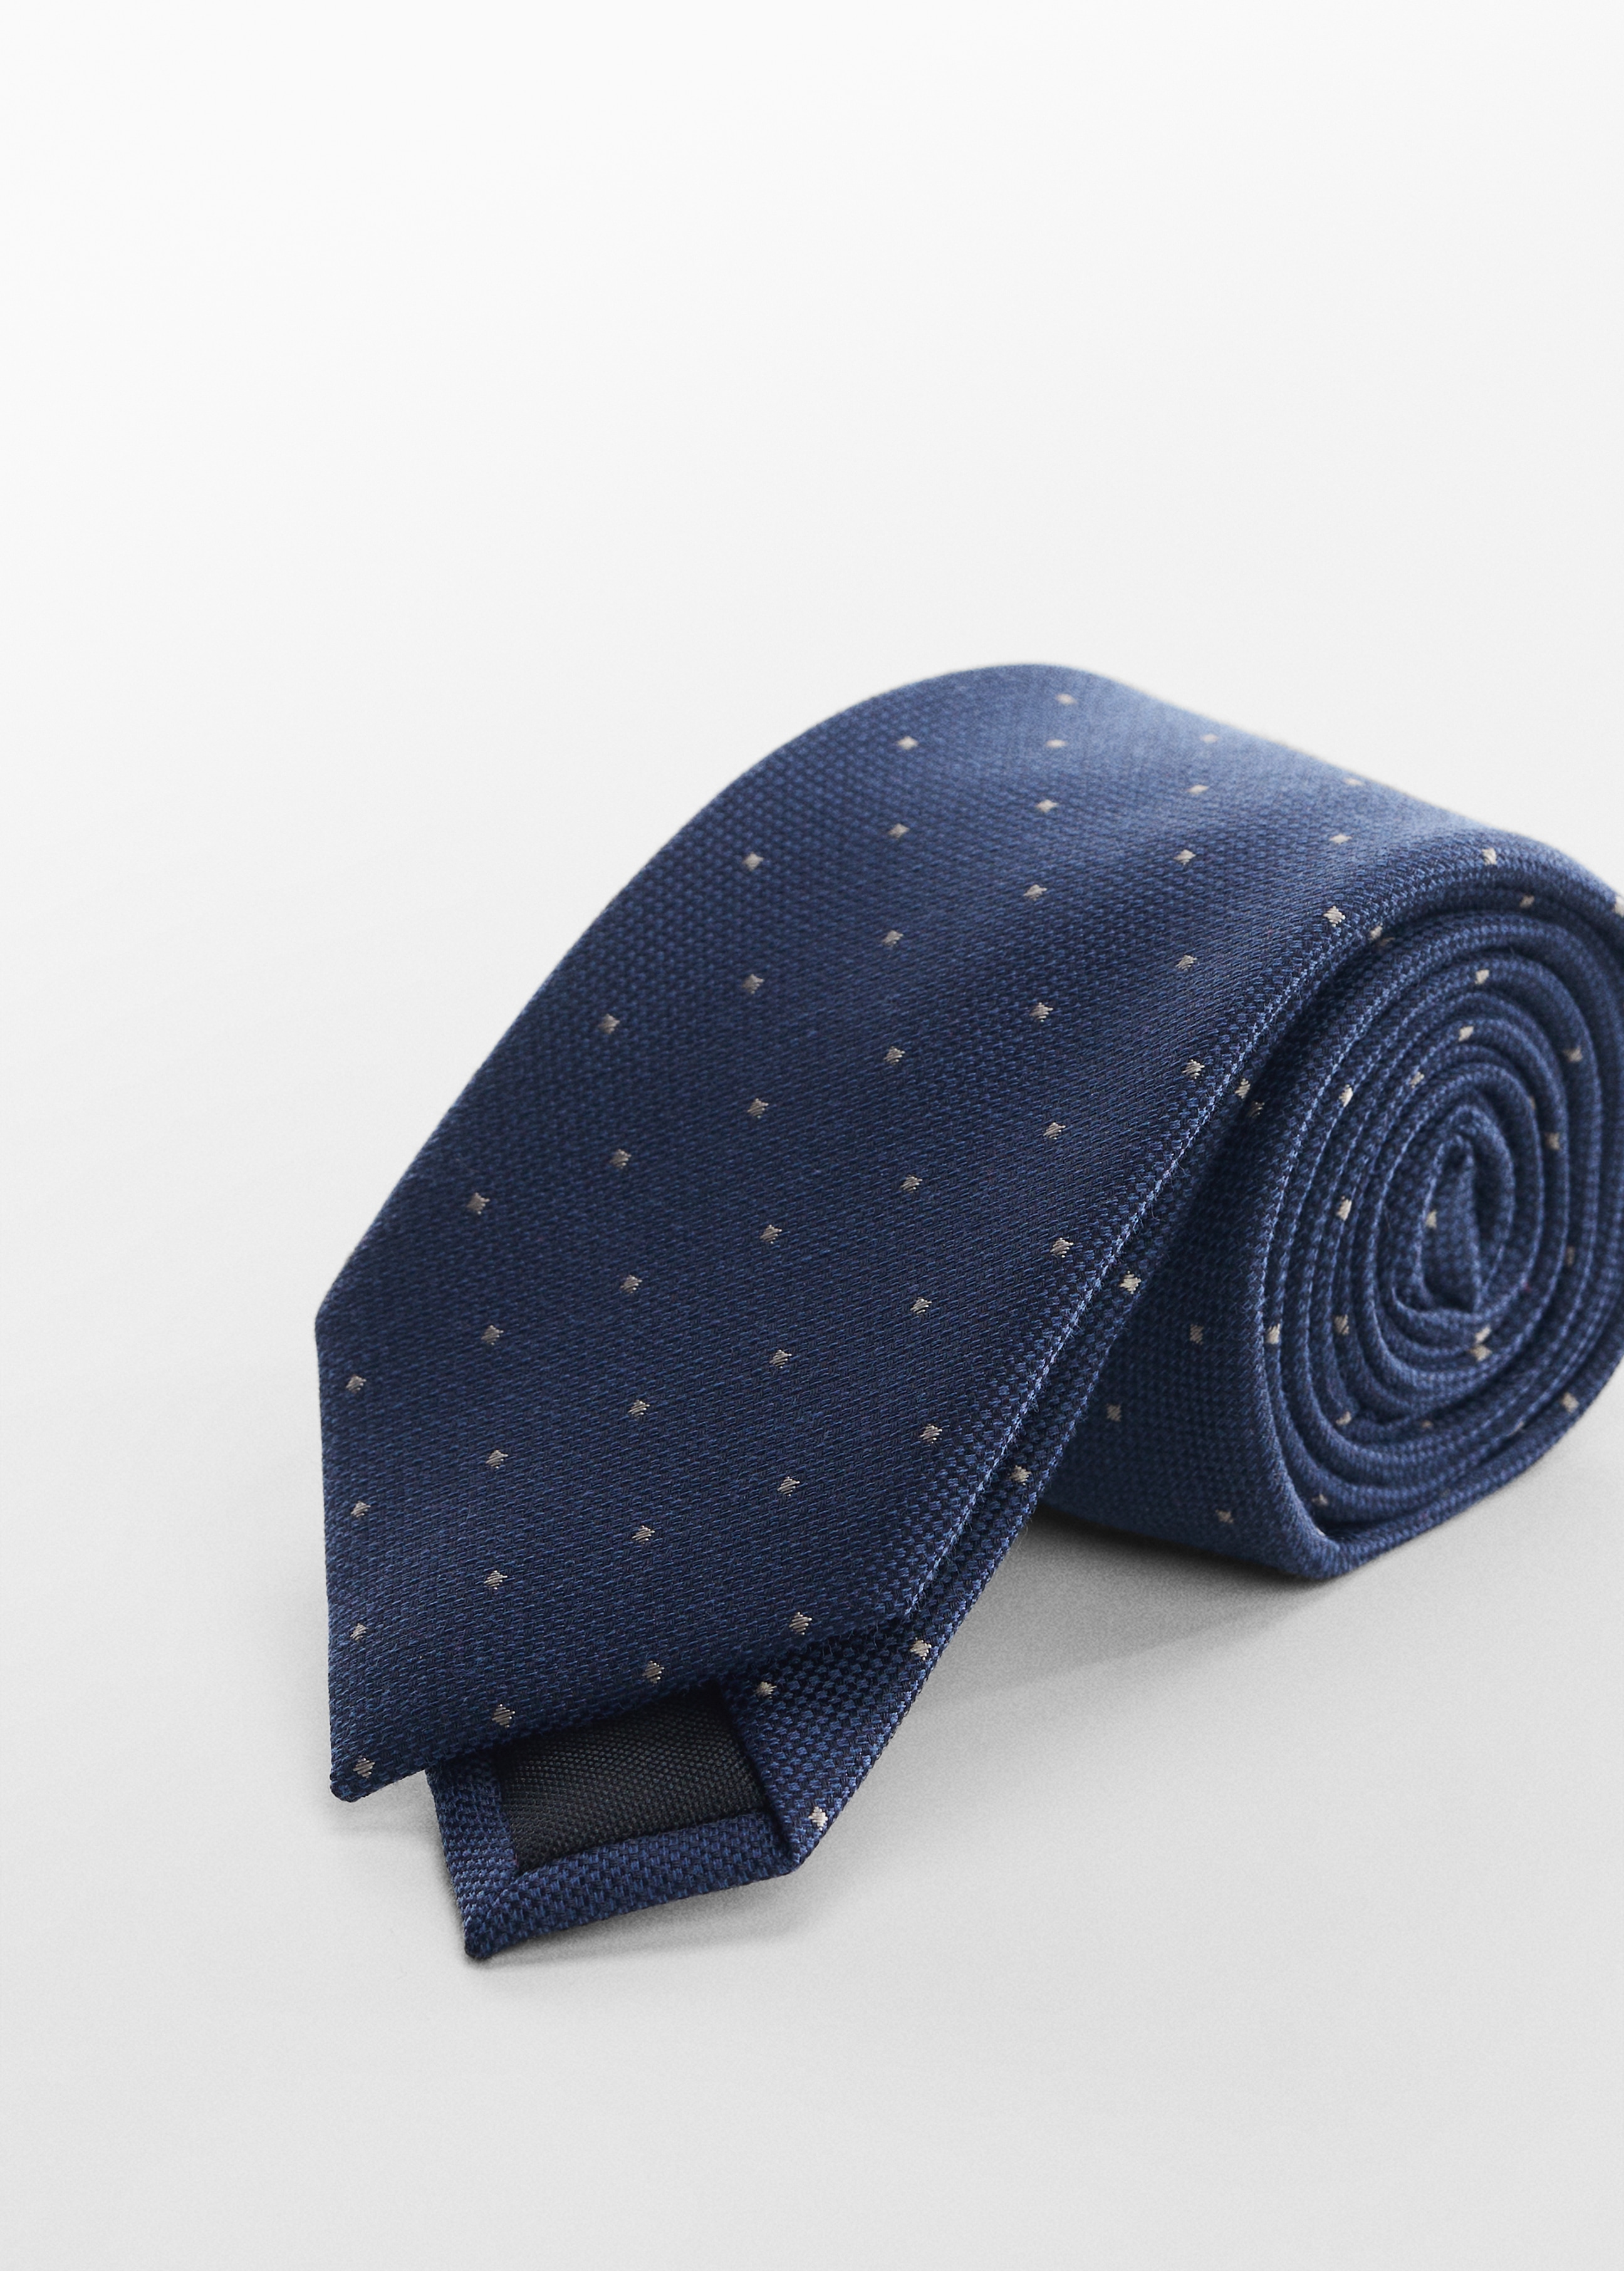 Tie with micro polka-dot structure - Medium plane